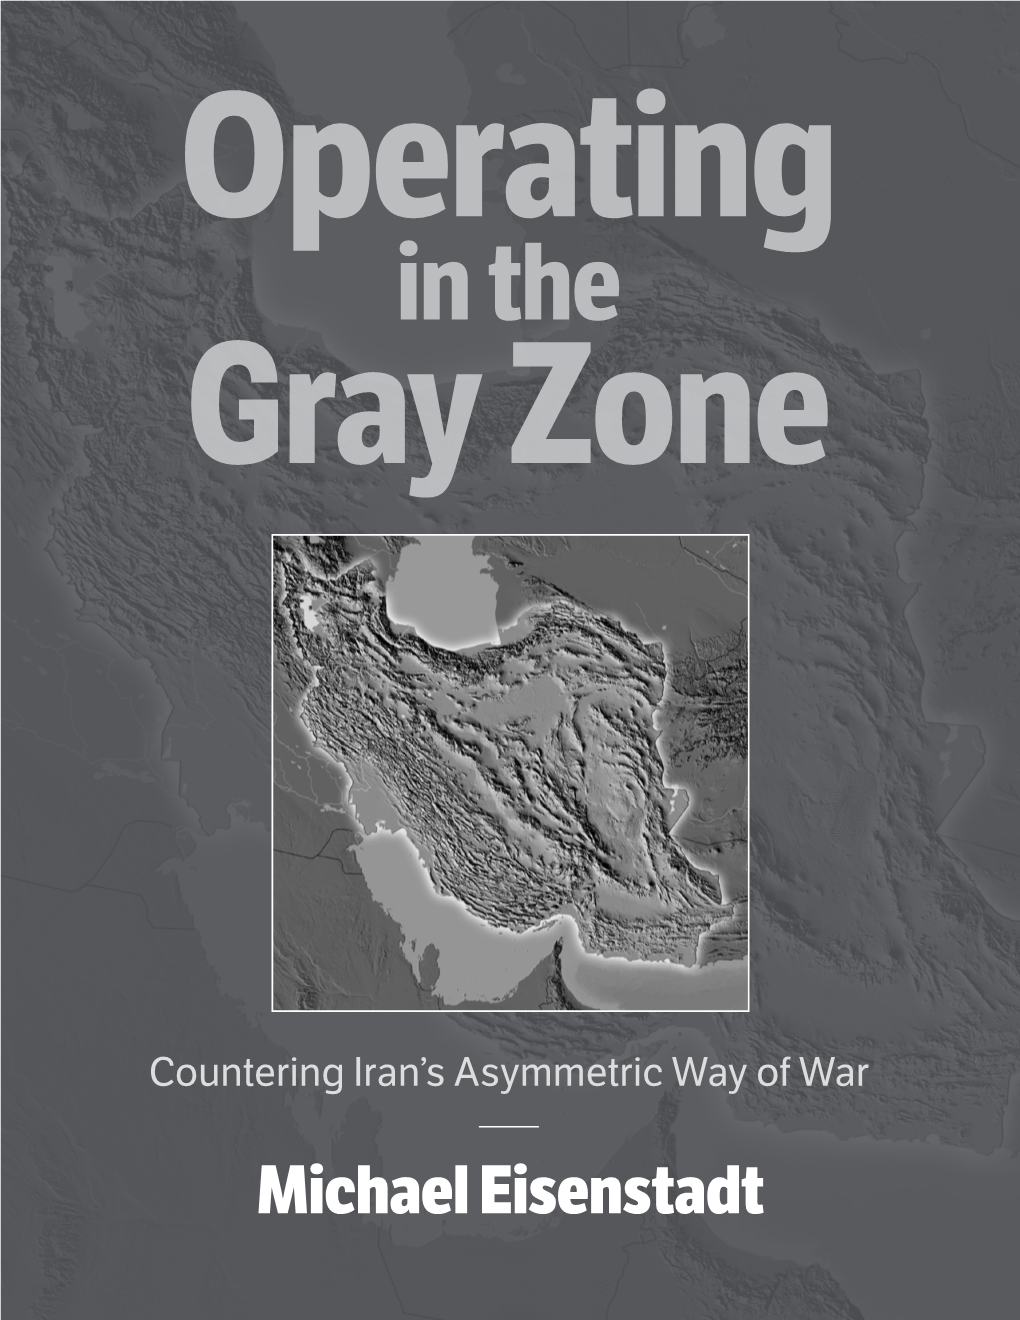 Ing in the Gray Zone